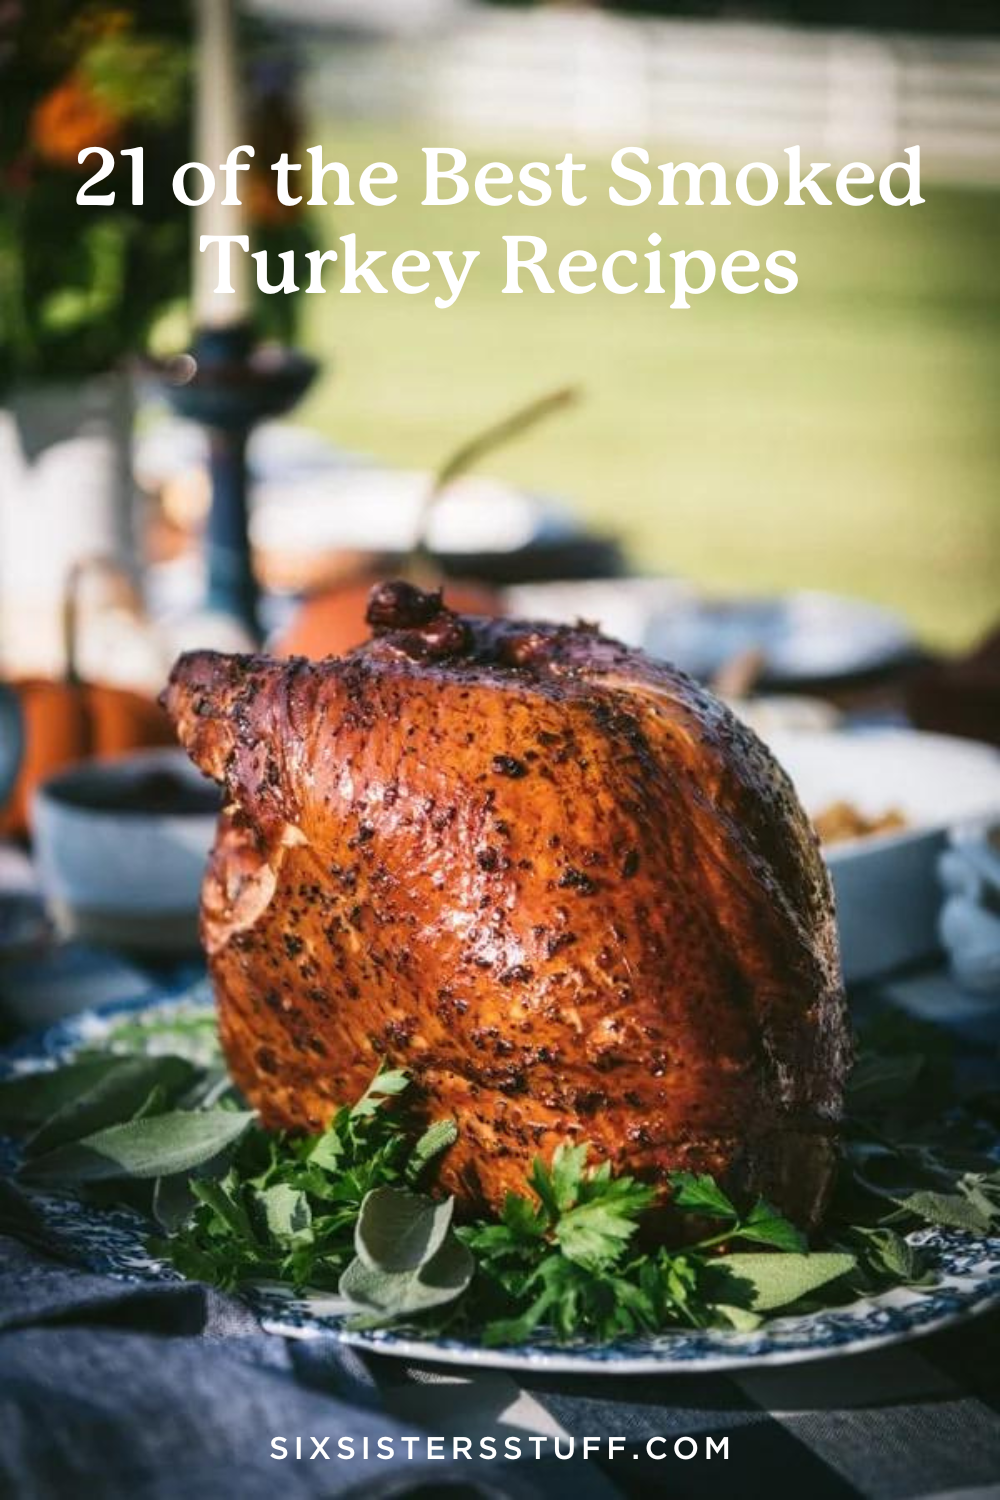 21 of the Best Smoked Turkey Recipes